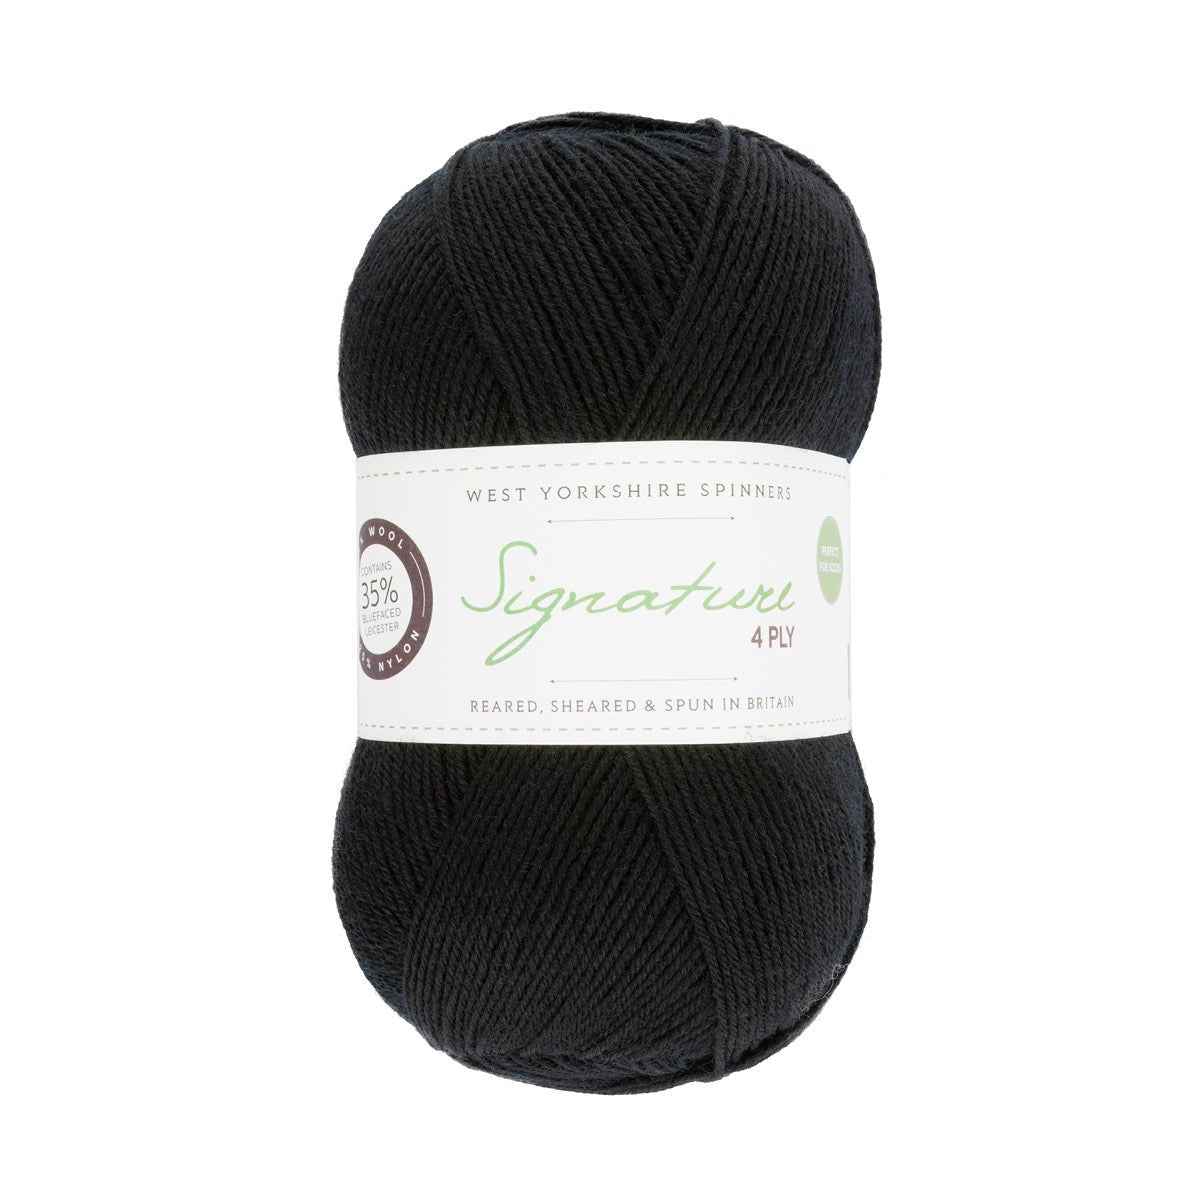 SIGNATURE 4PLY 099-Liquorice - West Yorkshire Spinners